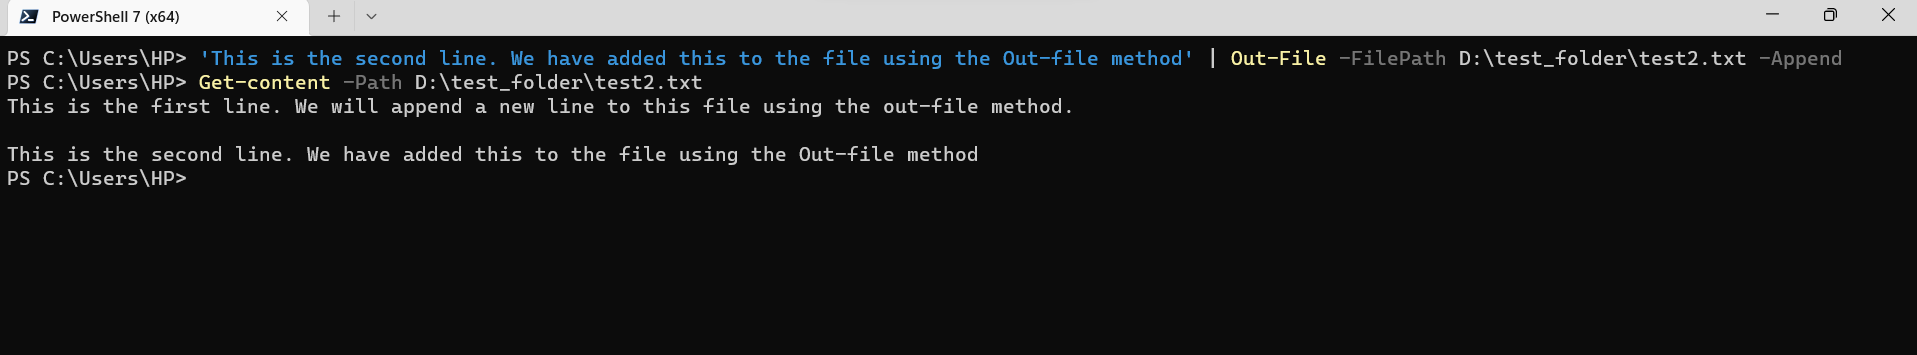 Append text using out-file method in Powershell